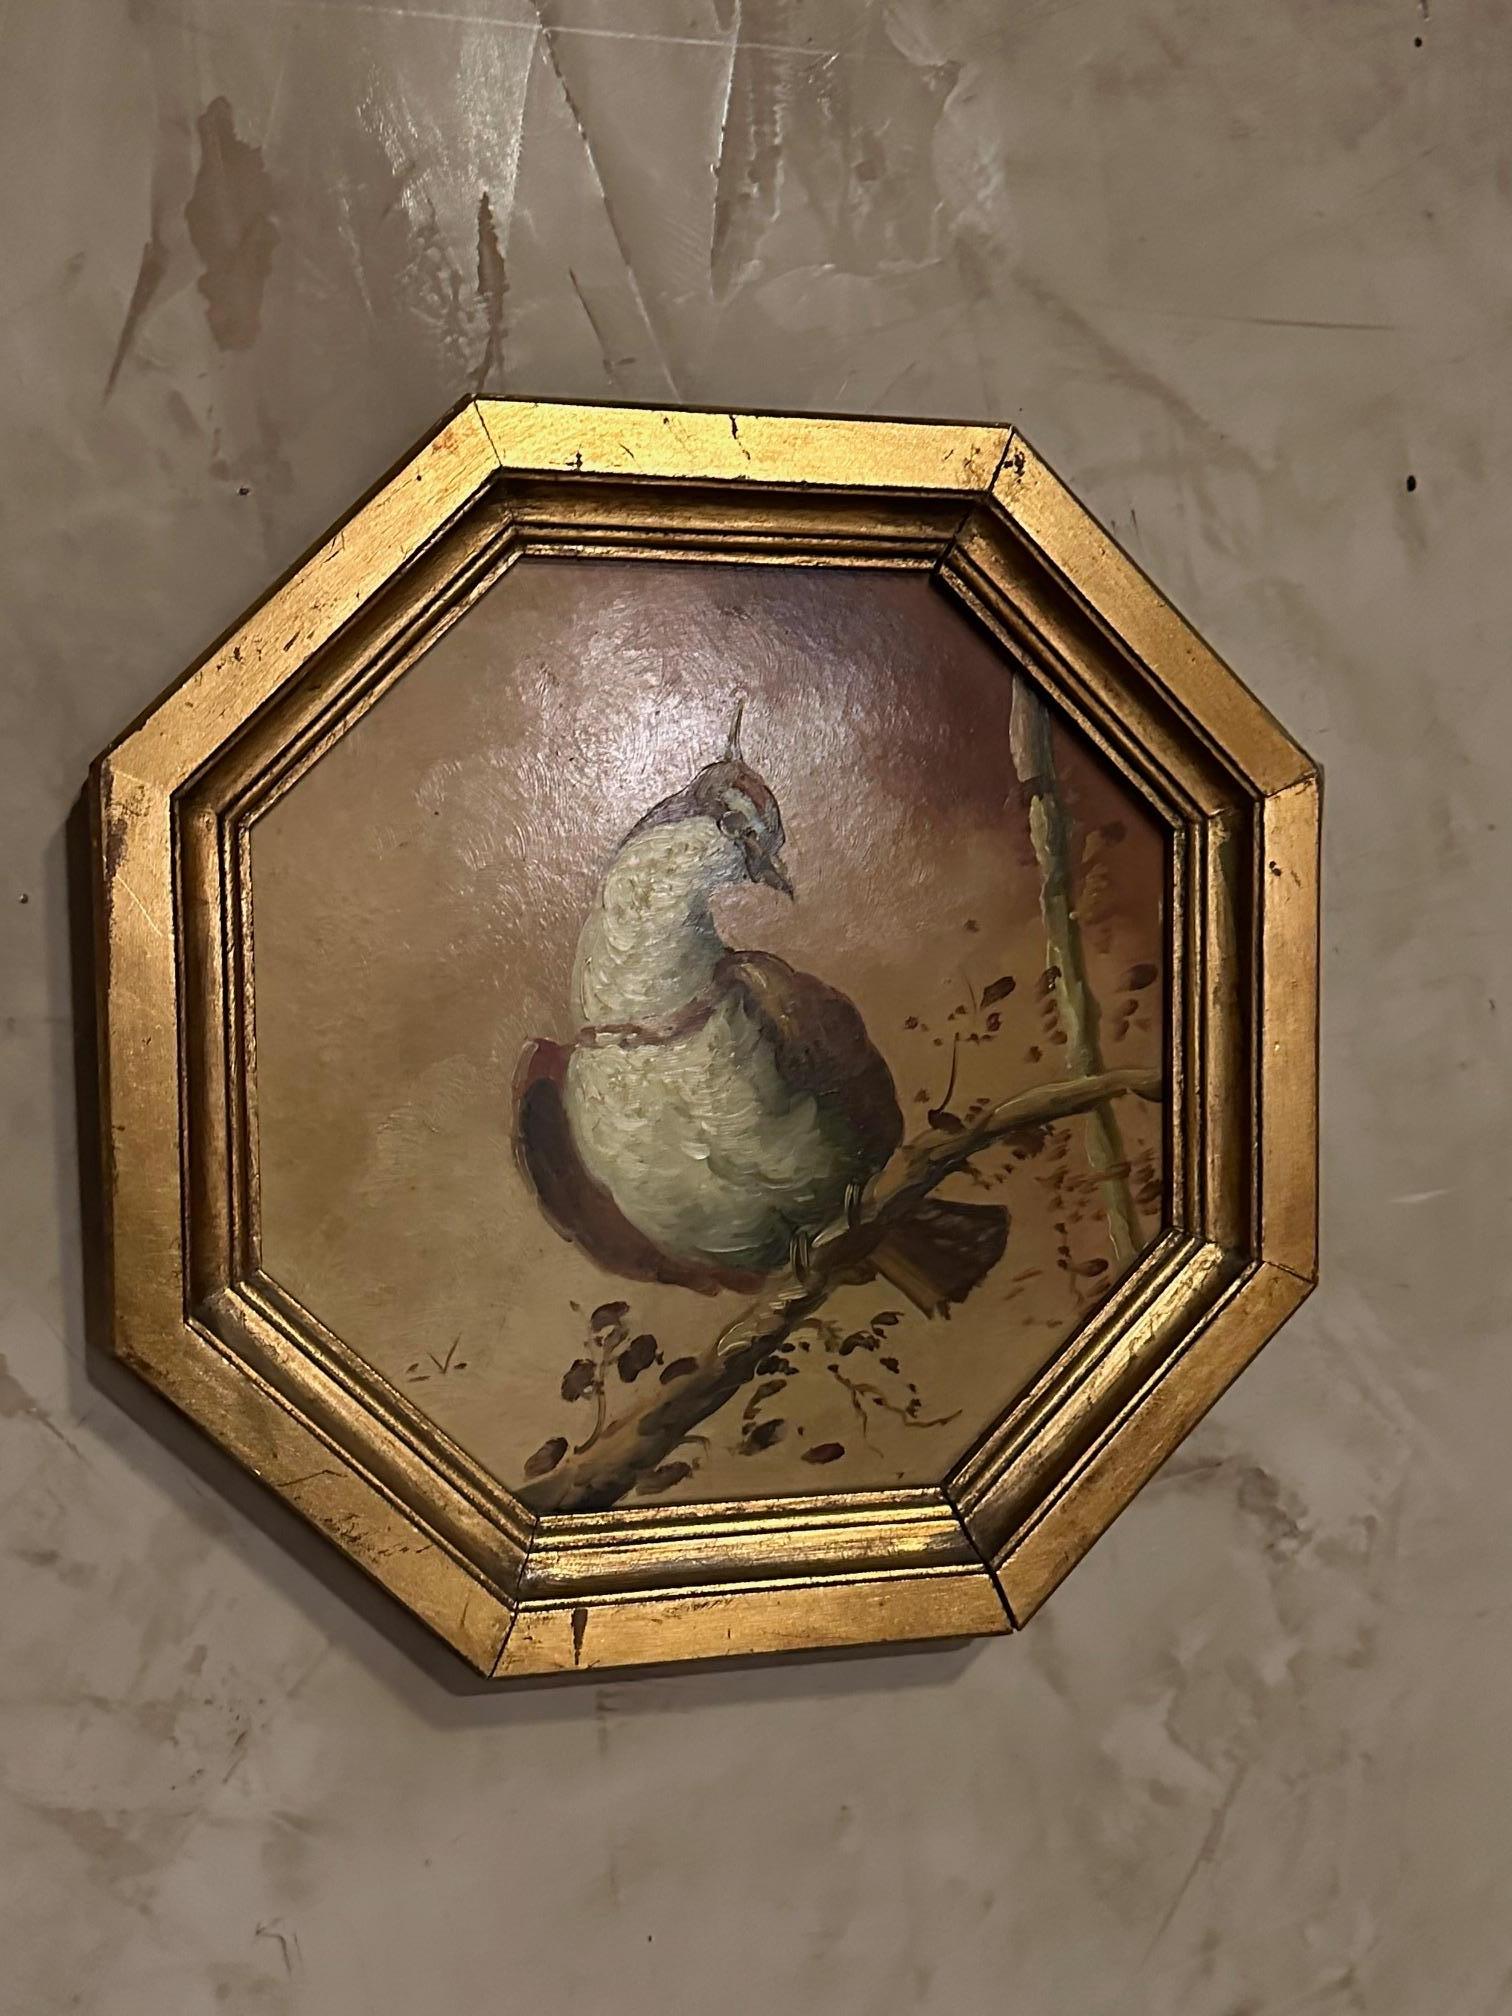 Pretty octagonal painting, oil on hardboard representing a dove on a branch.
Very romantic and delicate.
Octagonal frame in gilded wood. Hook on the back.
Beautiful work and good condition.